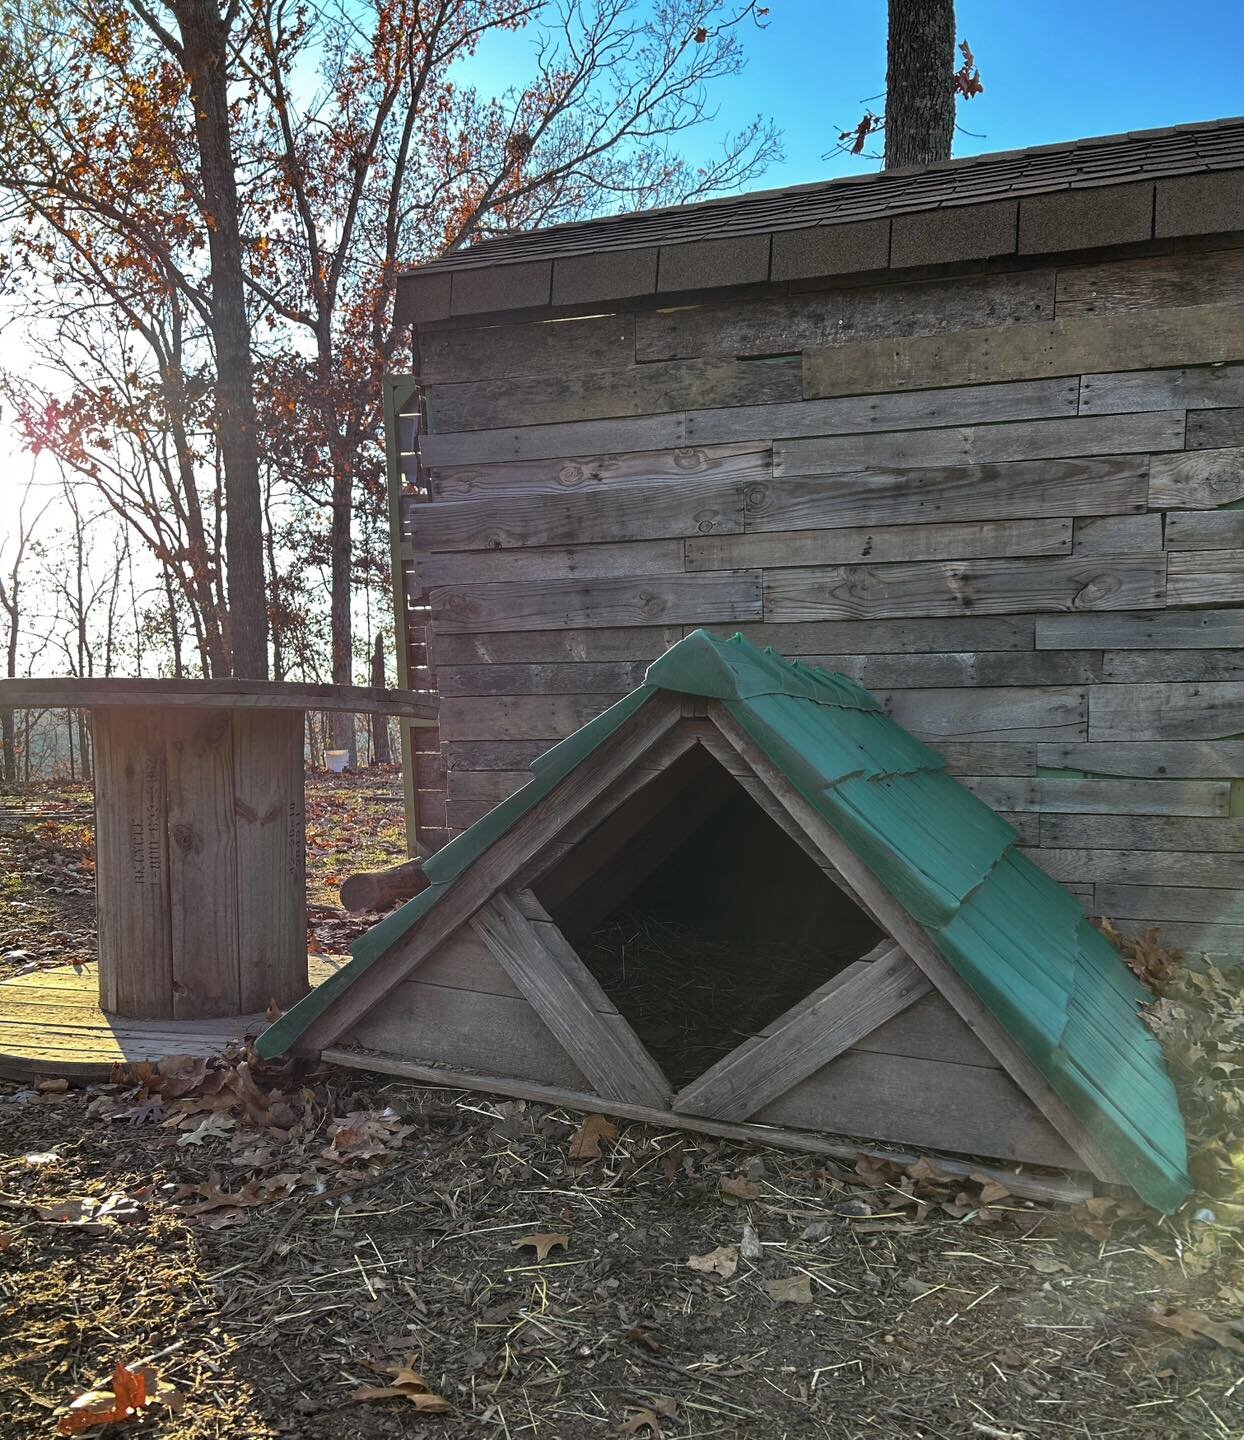 I love love love being about to re-purpose something into some thing else! These two goat shelters came from a termite weakened playhouse that saw many fun hours of play at my in-laws house. They may not be shiny and perfectly shabby chic for the gra